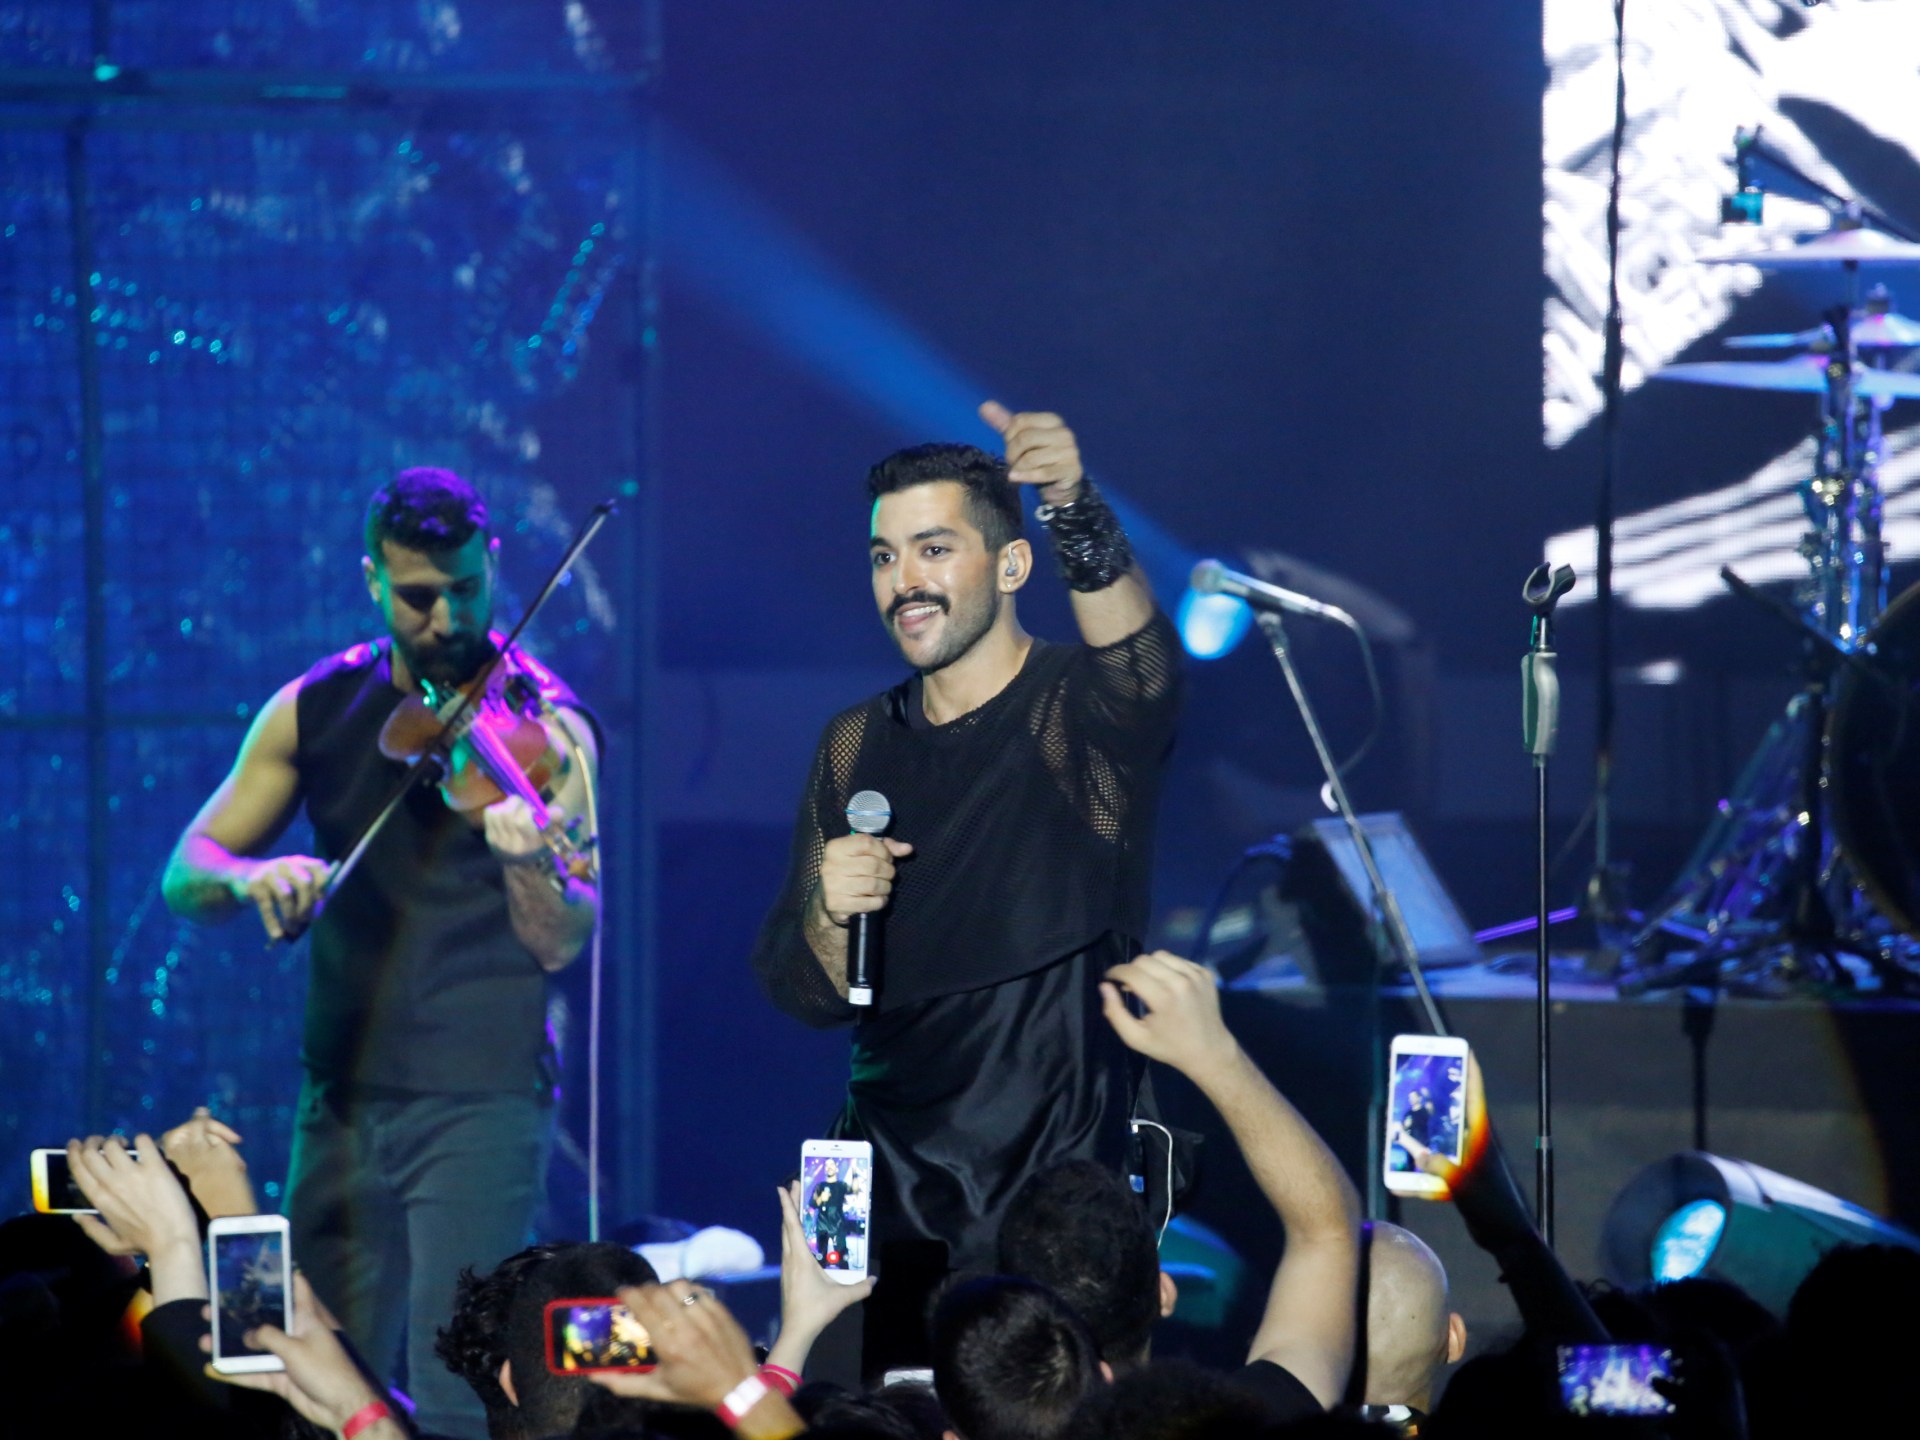 mashrou-leila-is-disbanding-here-are-5-songs-to-listen-to